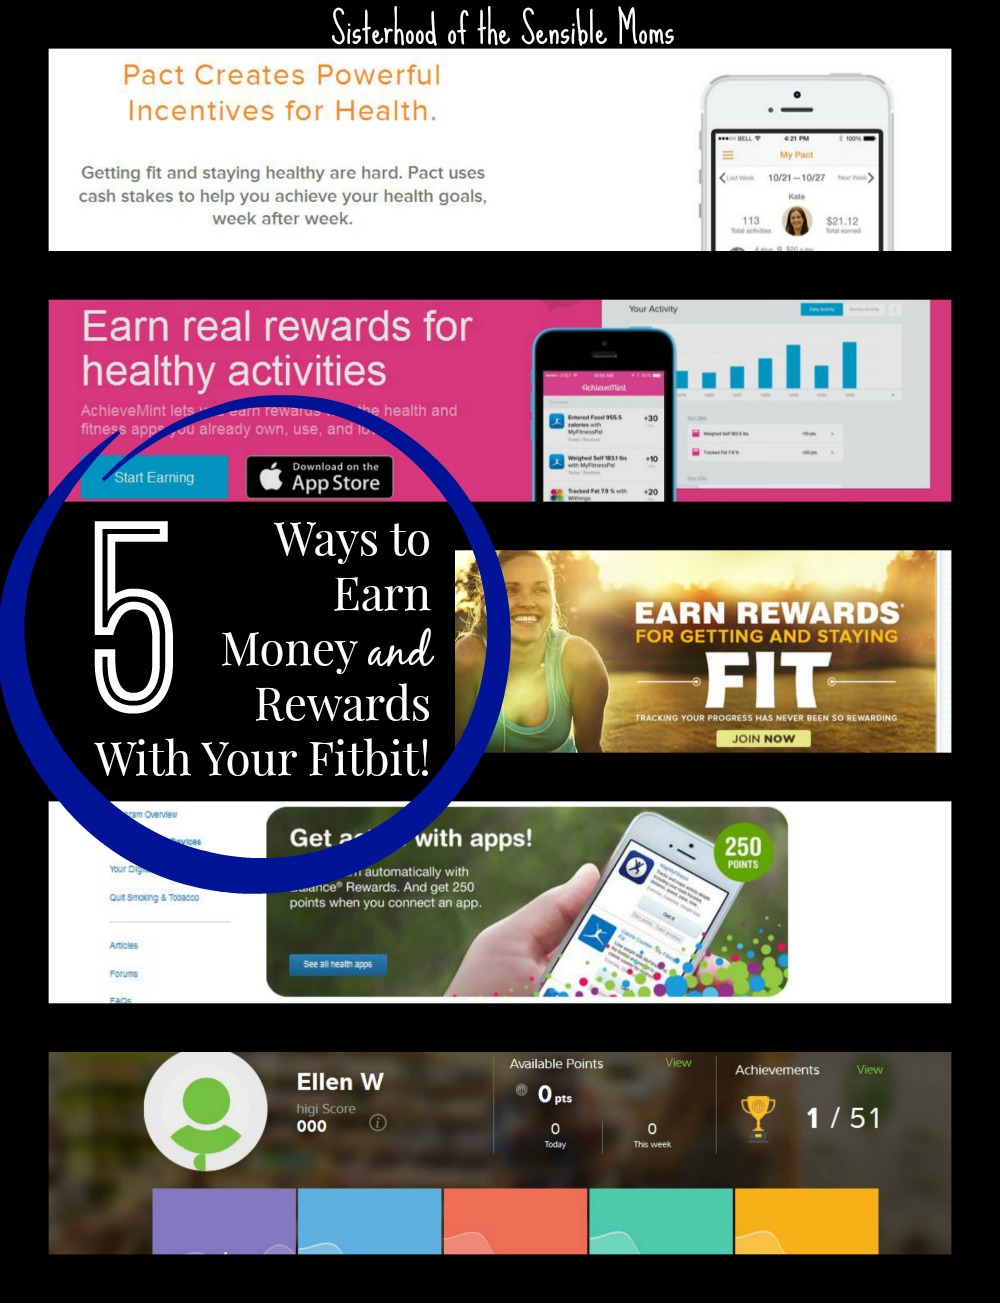 Here are 5 easy ways to earn money and rewards with your Fitbit fitness tracker. Good health and dollar bills! Holla! - Exercise pays off! - Sisterhood of the Sensible Moms